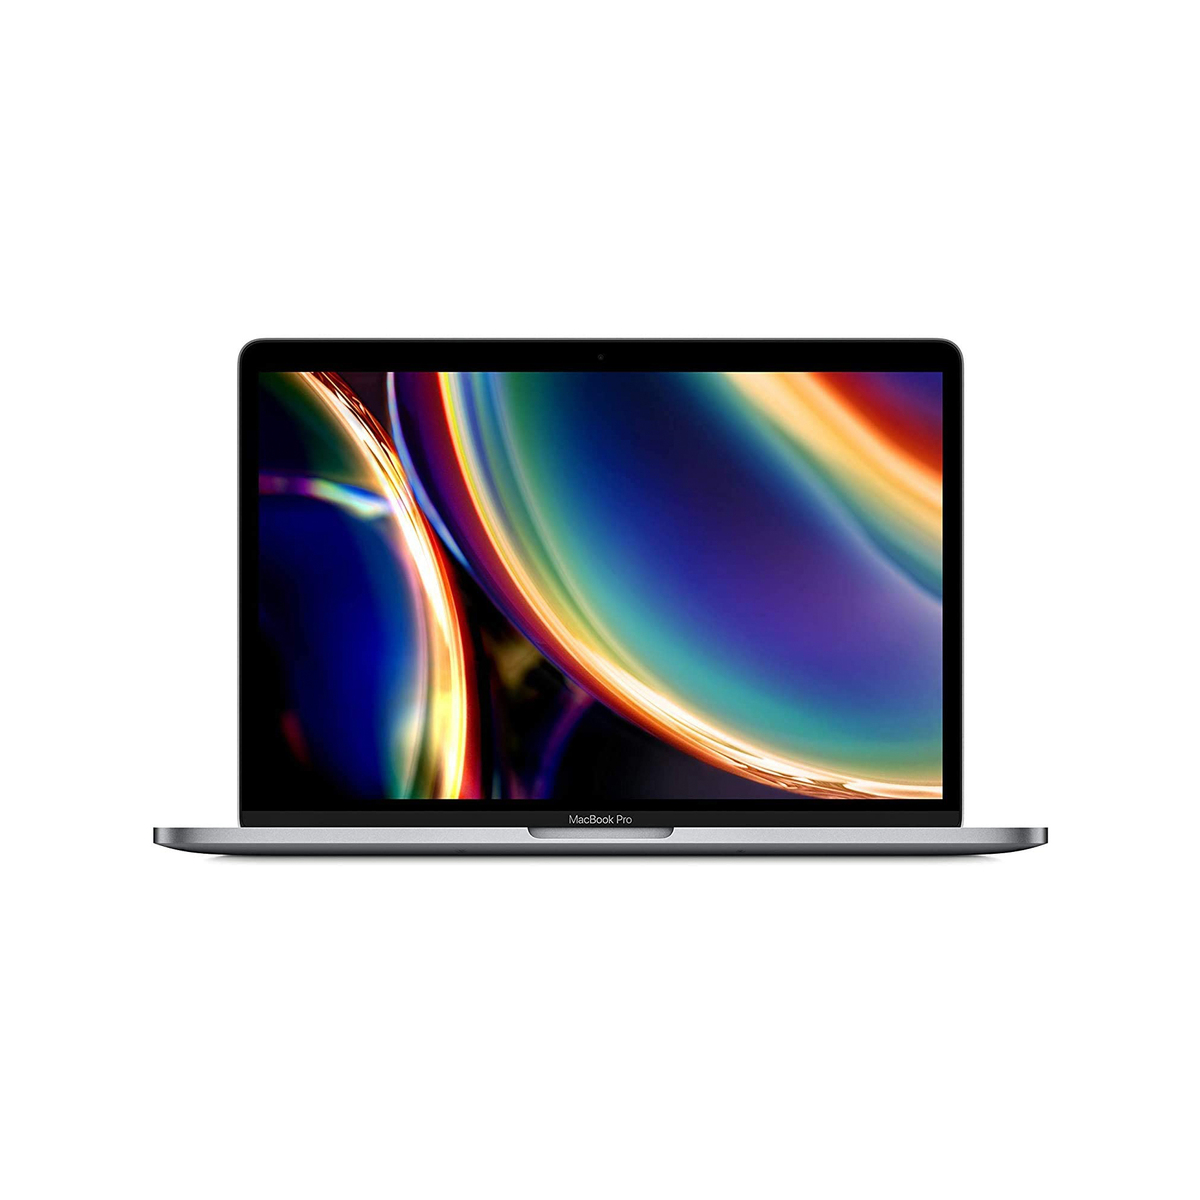 Apple MacBook Pro 2020 Model (13-Inch, Intel Core i5, 2.0Ghz, 16GB, 512GB, Touch Bar, 4 Thunderbolt 3 Ports, MWP42), Eng-Arb-KB, Space Grey